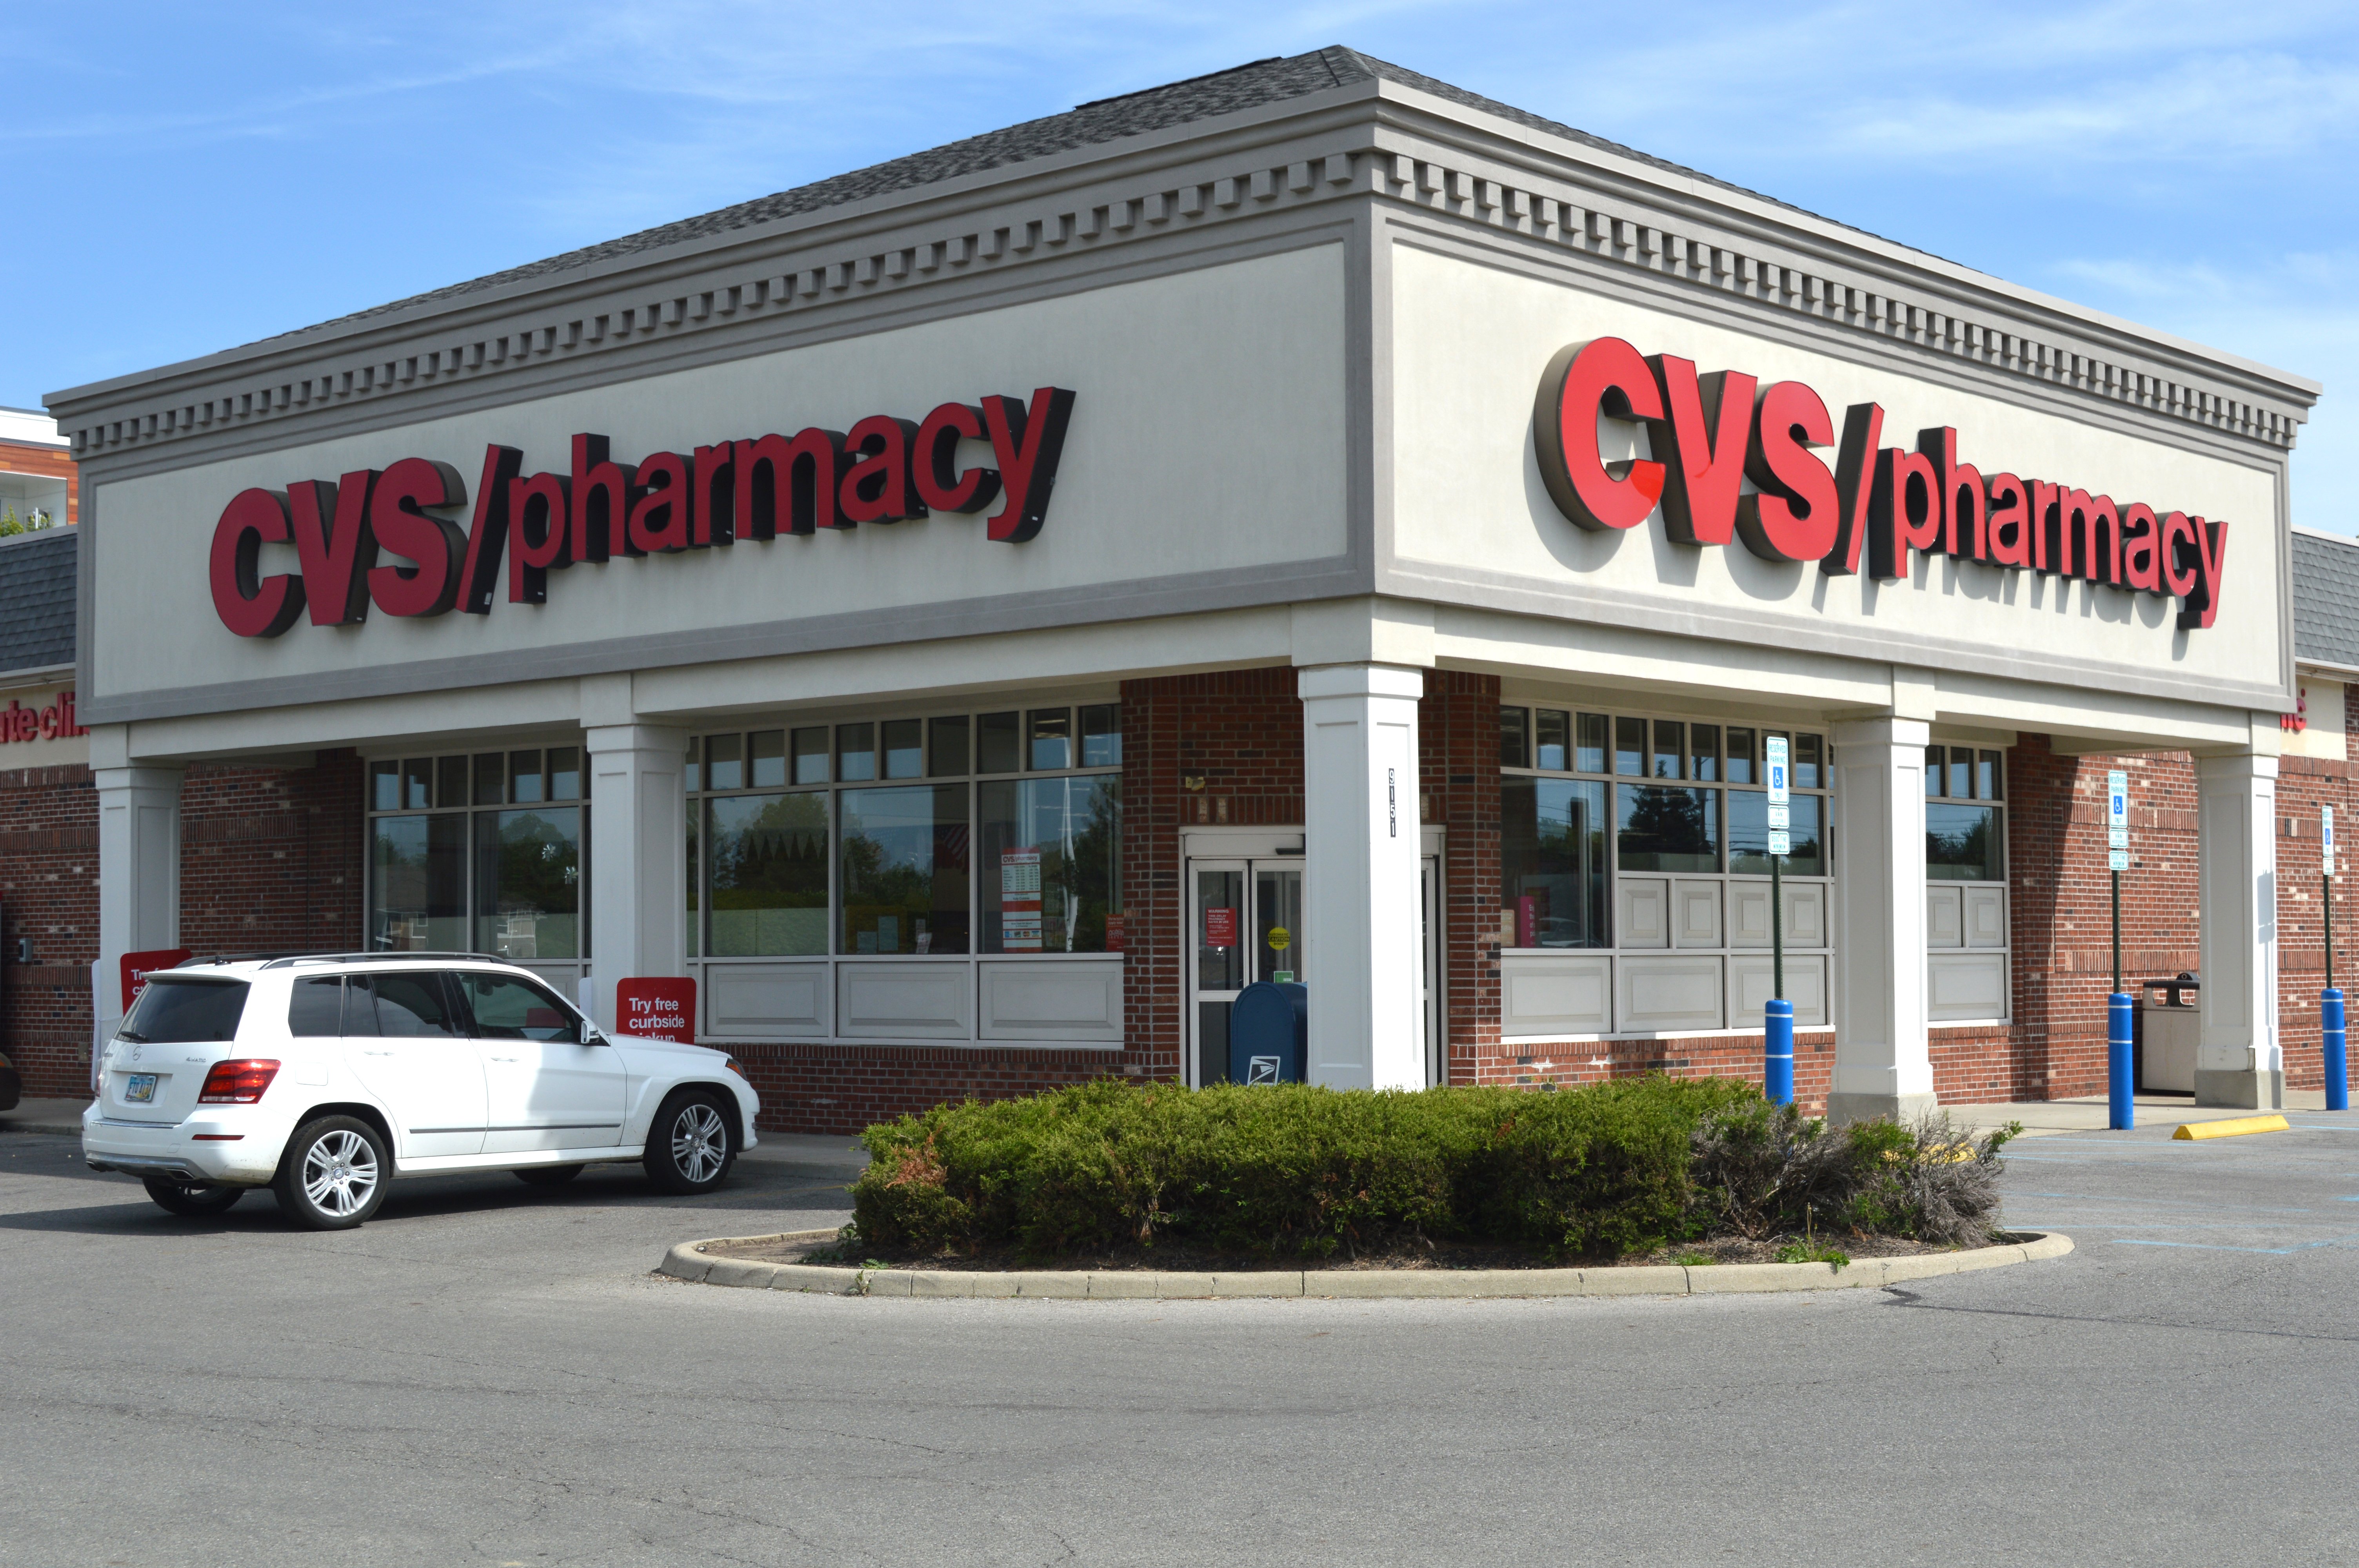 The front entrance of a CVS Pharmacy